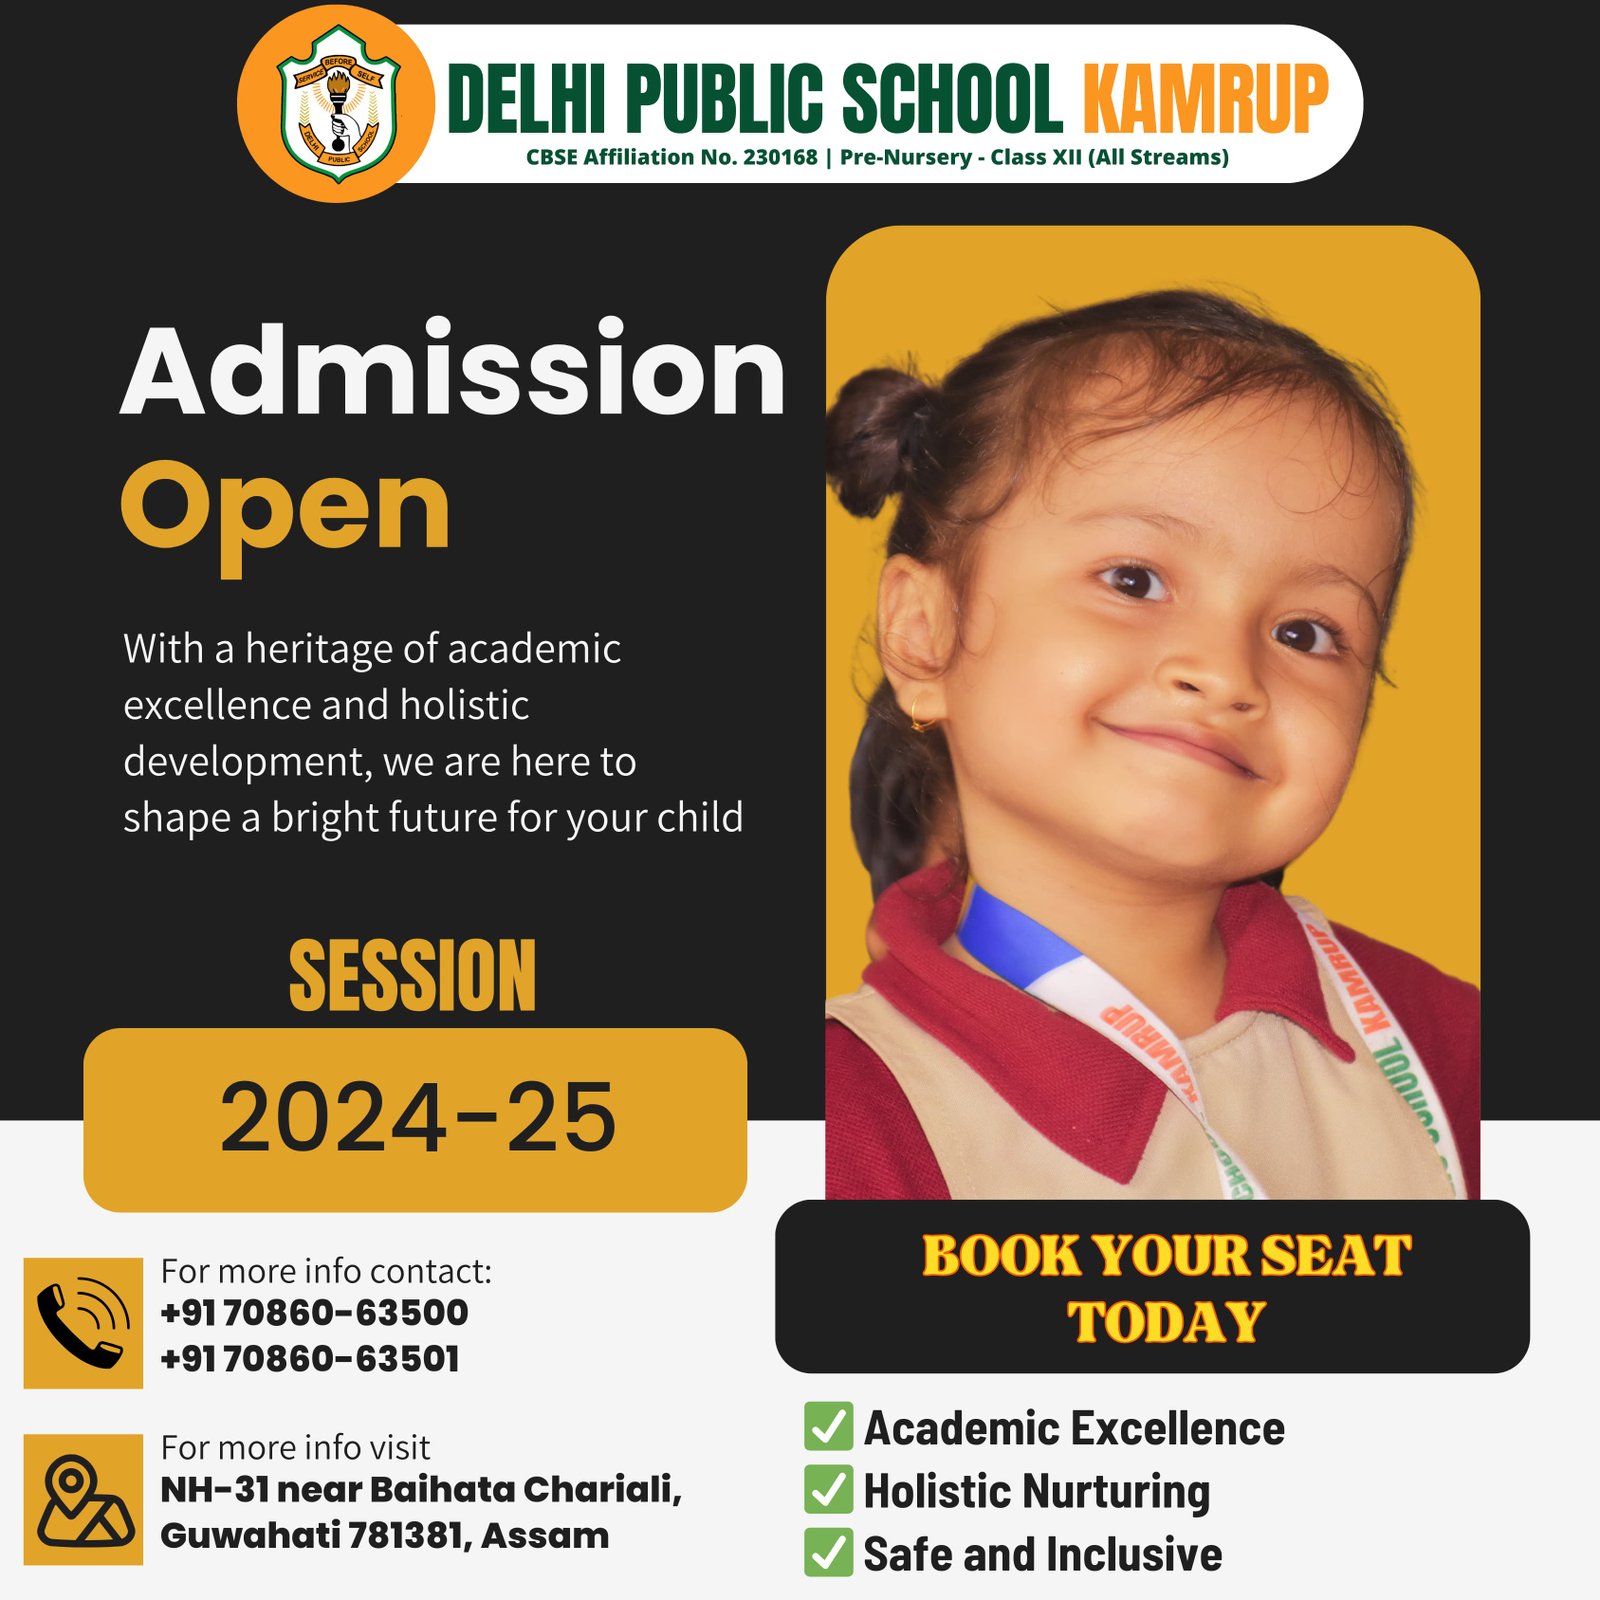 DPS, Kamrup Admission Open for 2023-24